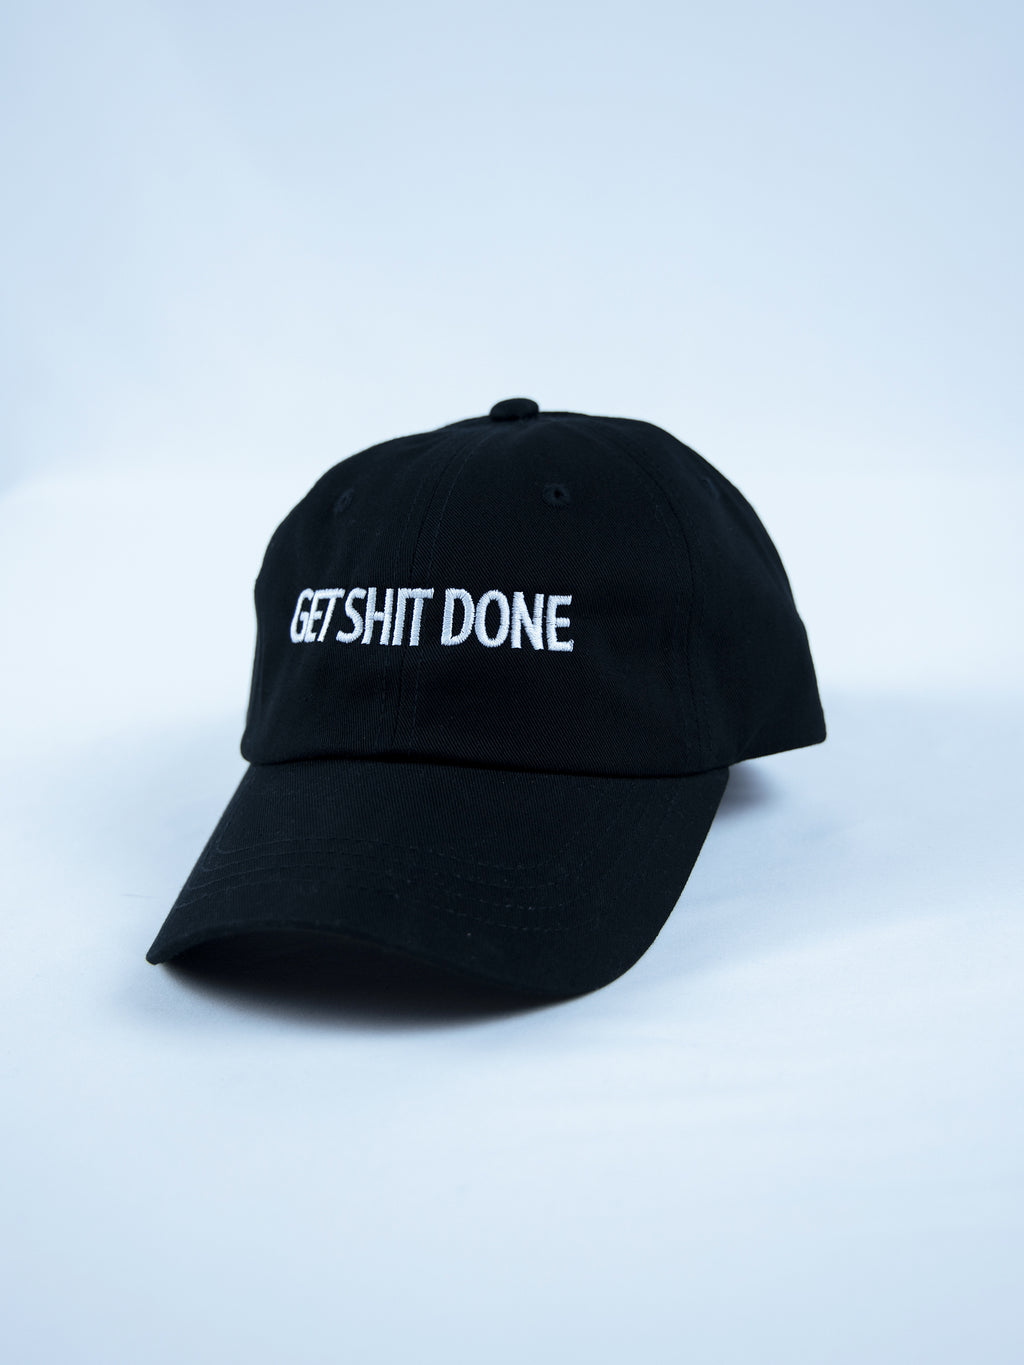 "Get Shit Done" Dad Hat, Embroidered